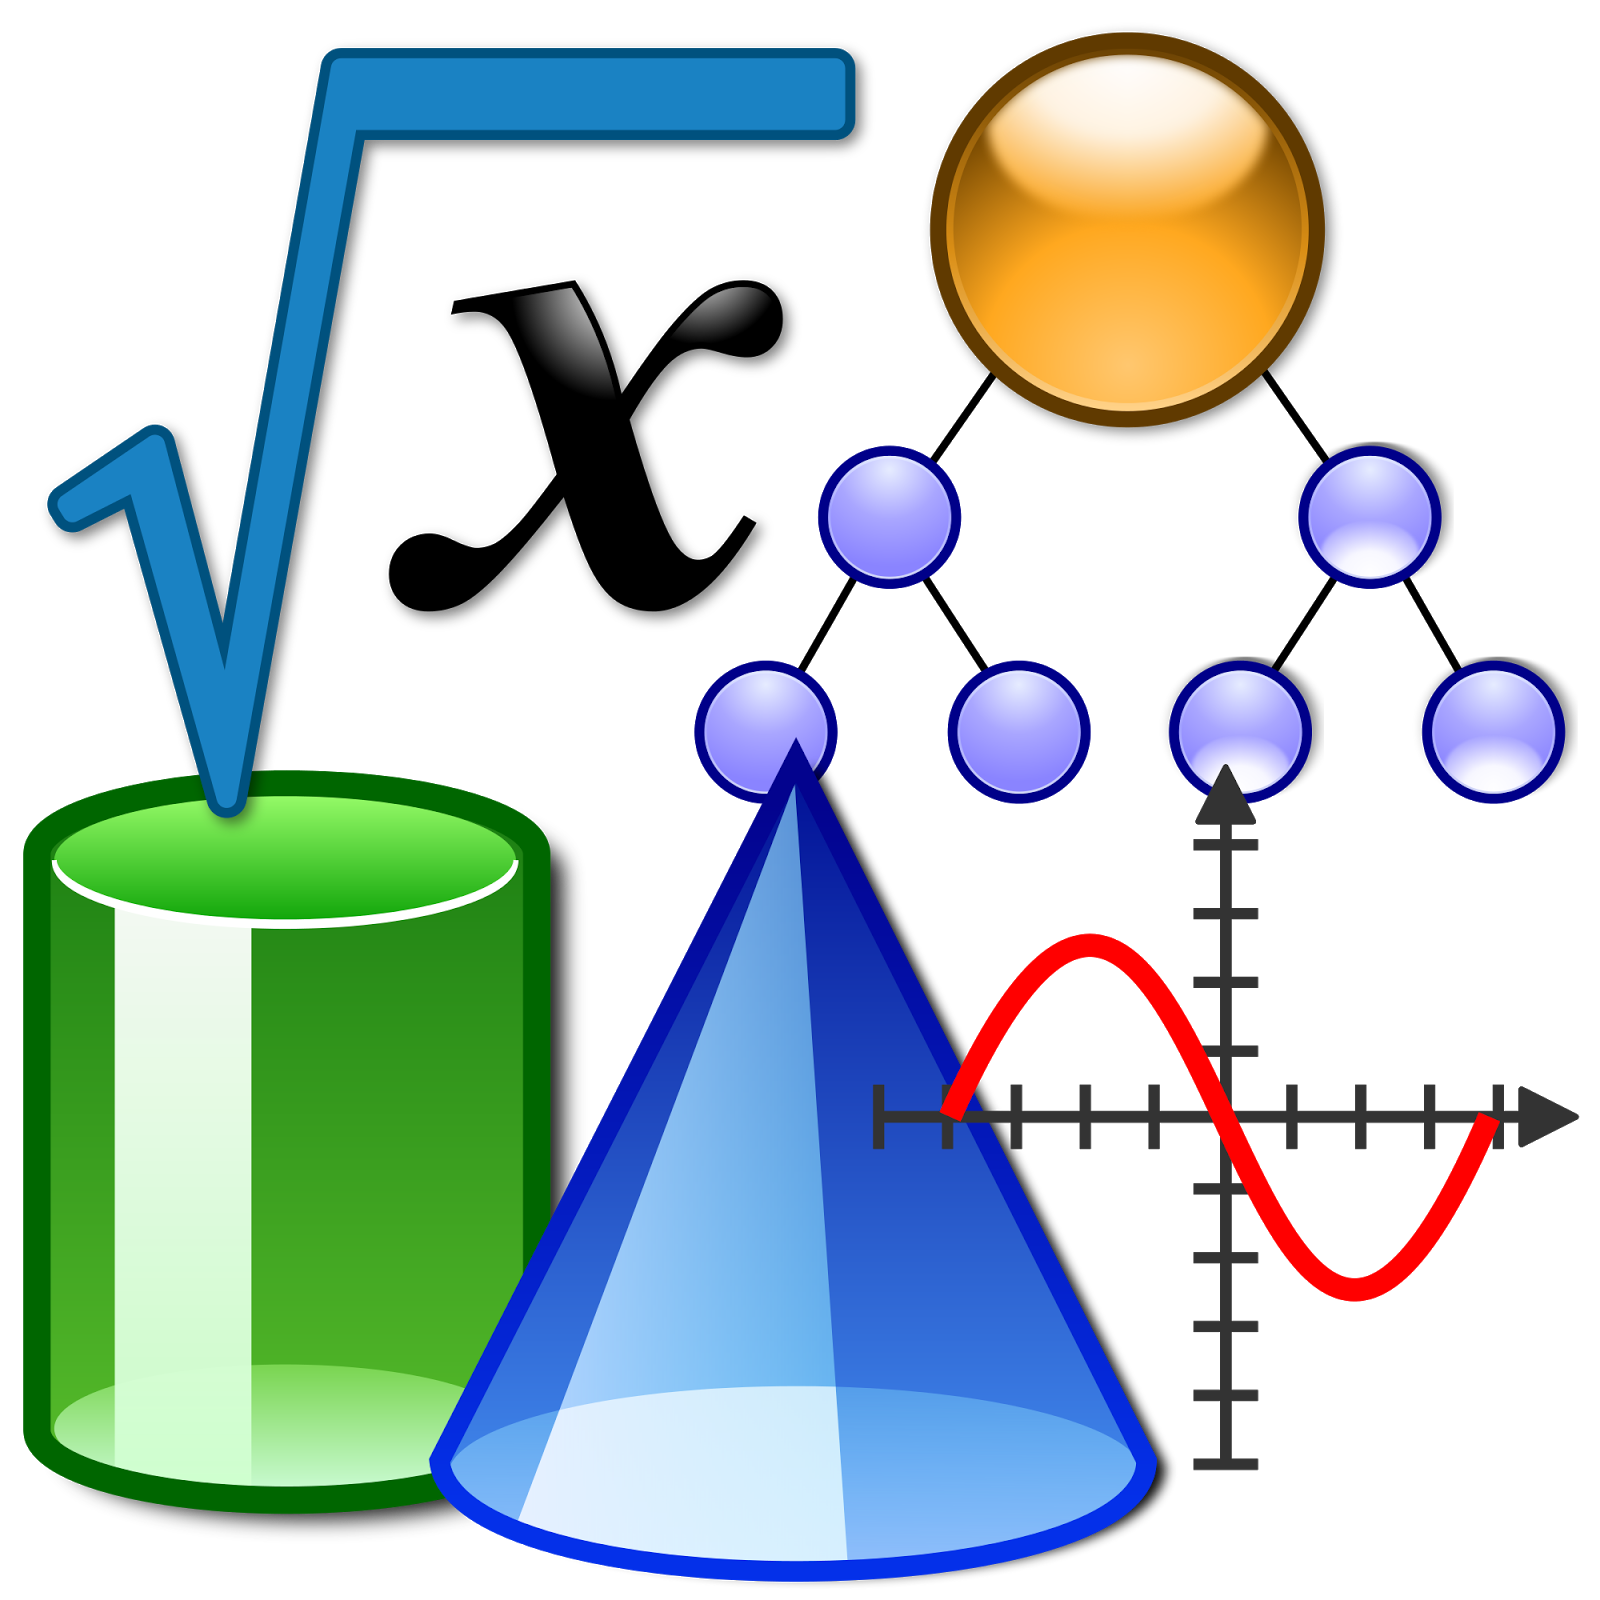 Green cylinder, blue cone, parabola, spheres and square root of x symbol